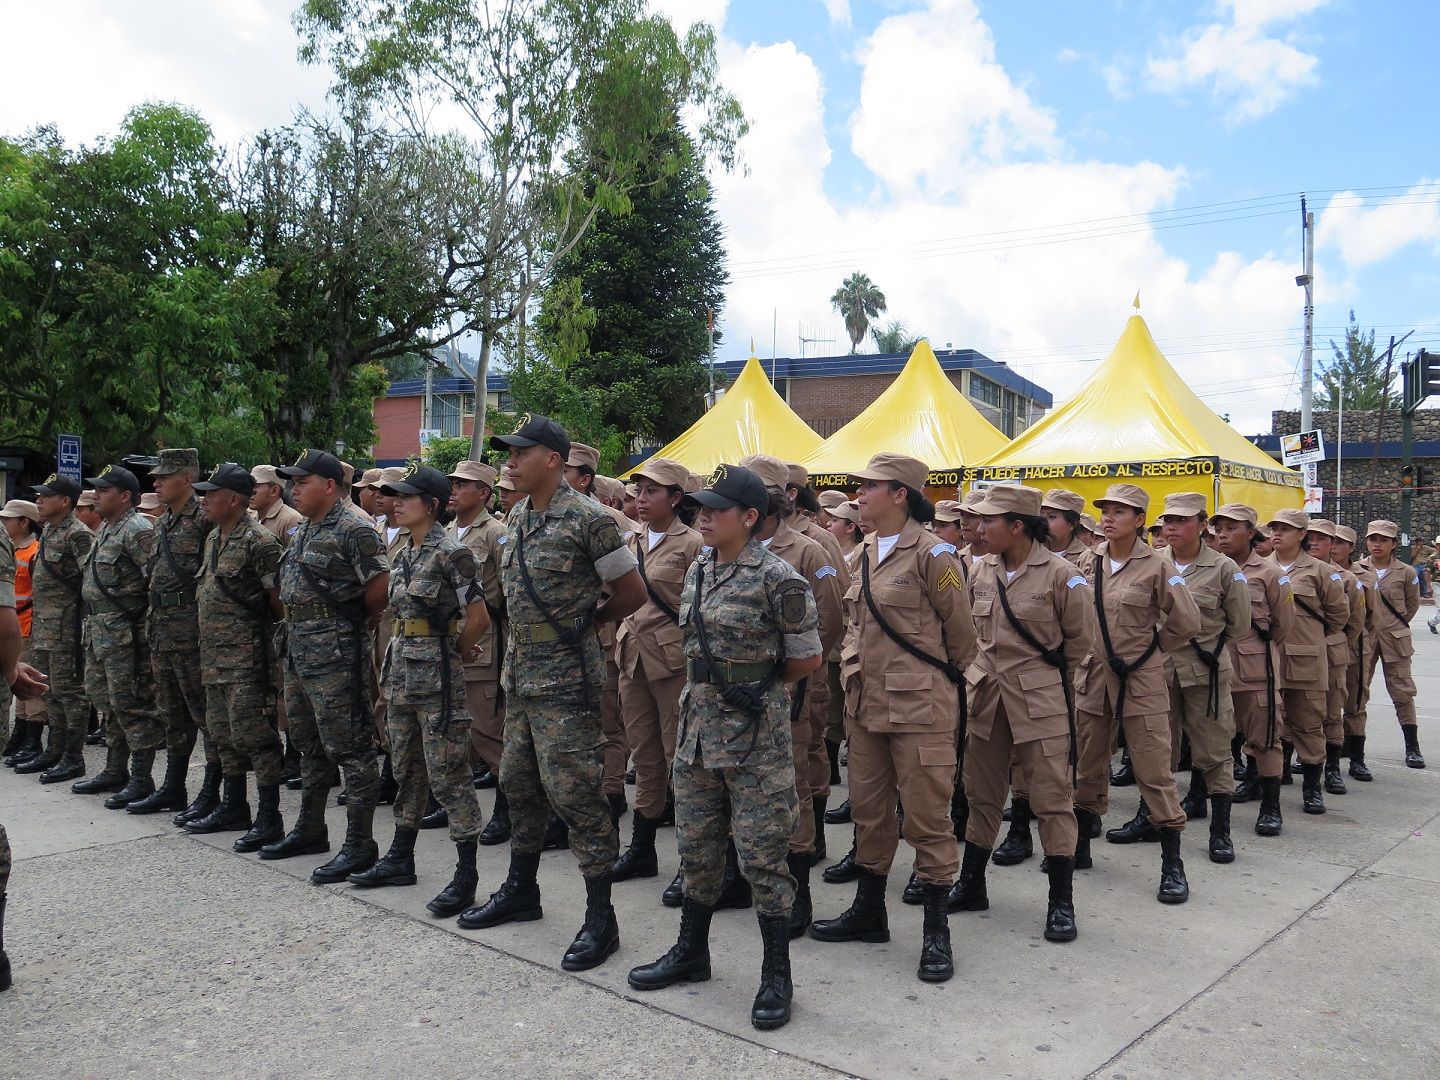 The Guatemala military attend the opening ceremony.